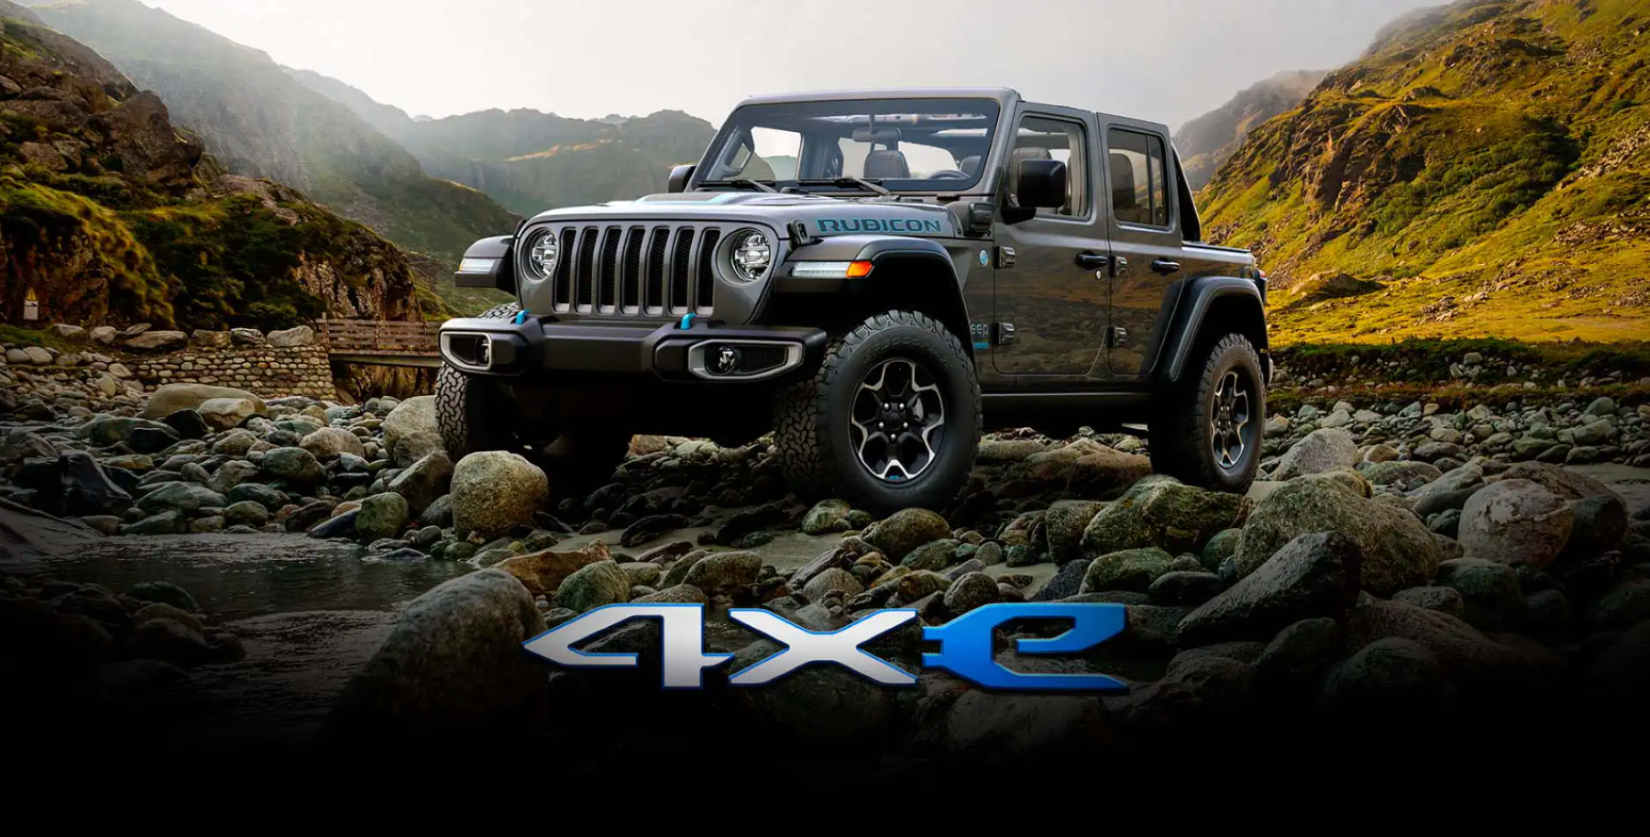 The Jeep Wrangler Rubicon 4xe plug-in hybrid electric vehicle (PHEV) parked on a plateau of rocks and pebbles